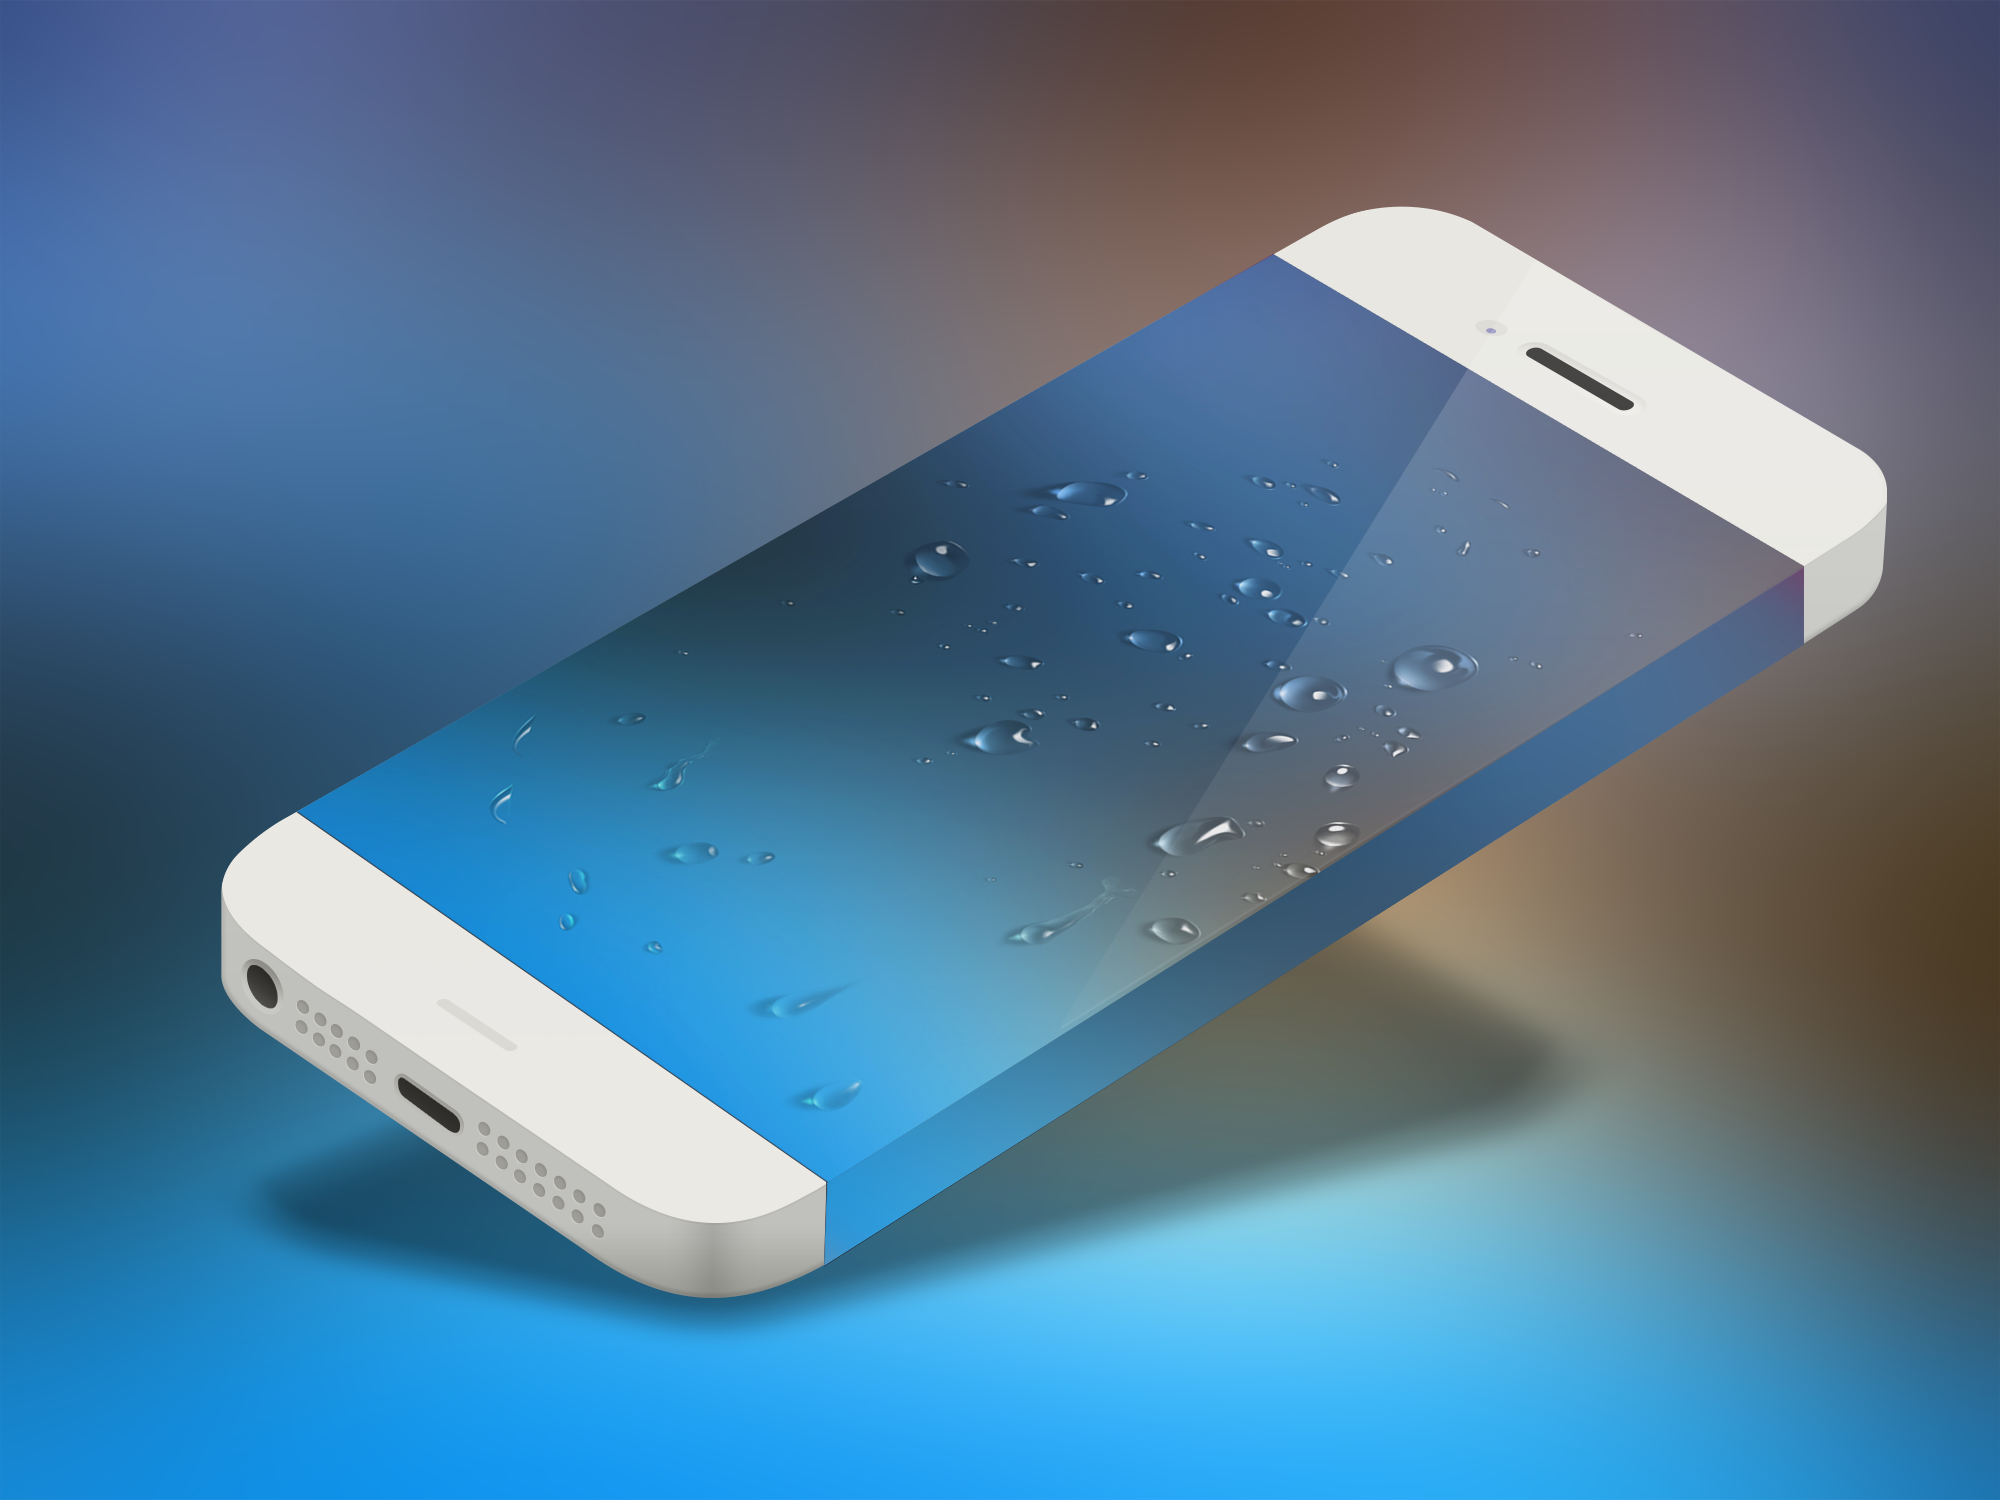 iphone-7-concept-1.png